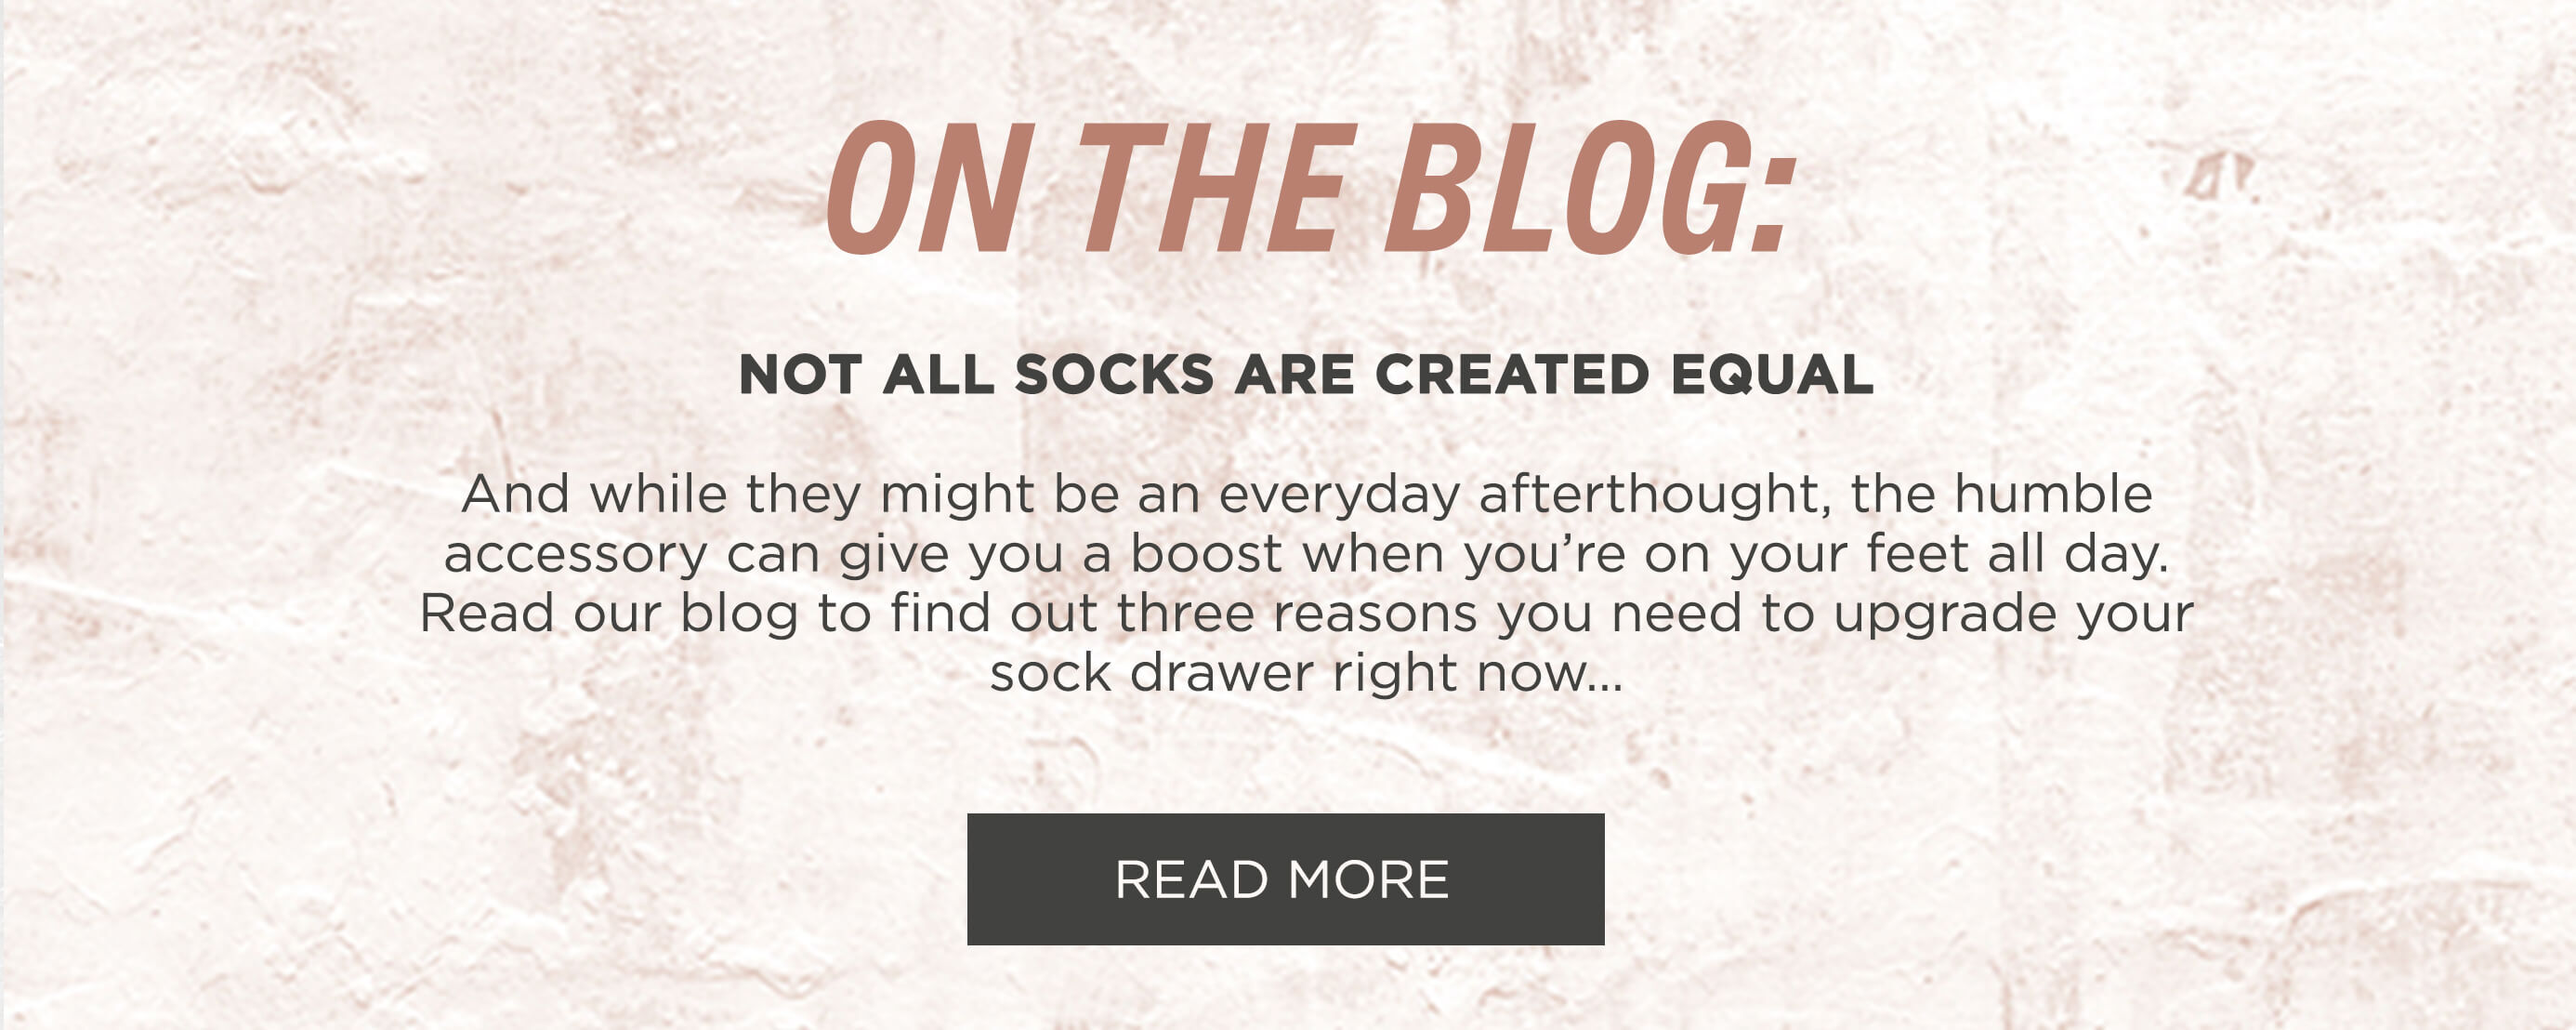 On the Blog: Not All Socks are Created Equal. Read More.